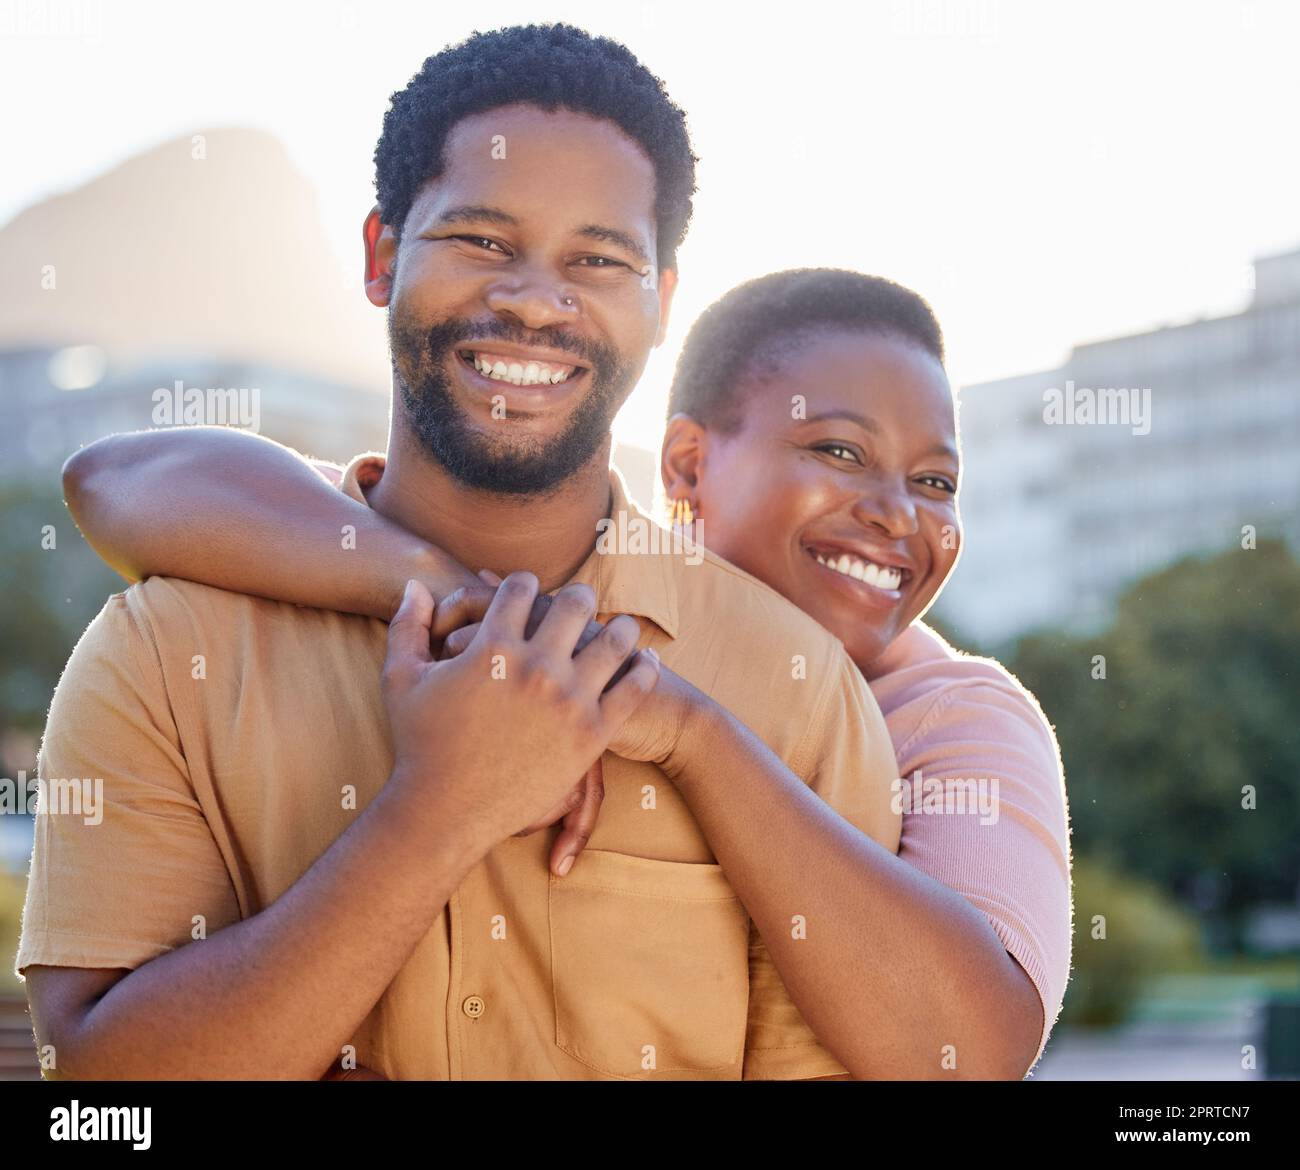 Portrait, happy and couple smile with hug while in the city on a date in summer. African american man and woman bonding together with joy, love and happiness in a healthy relationship or marriage Stock Photo